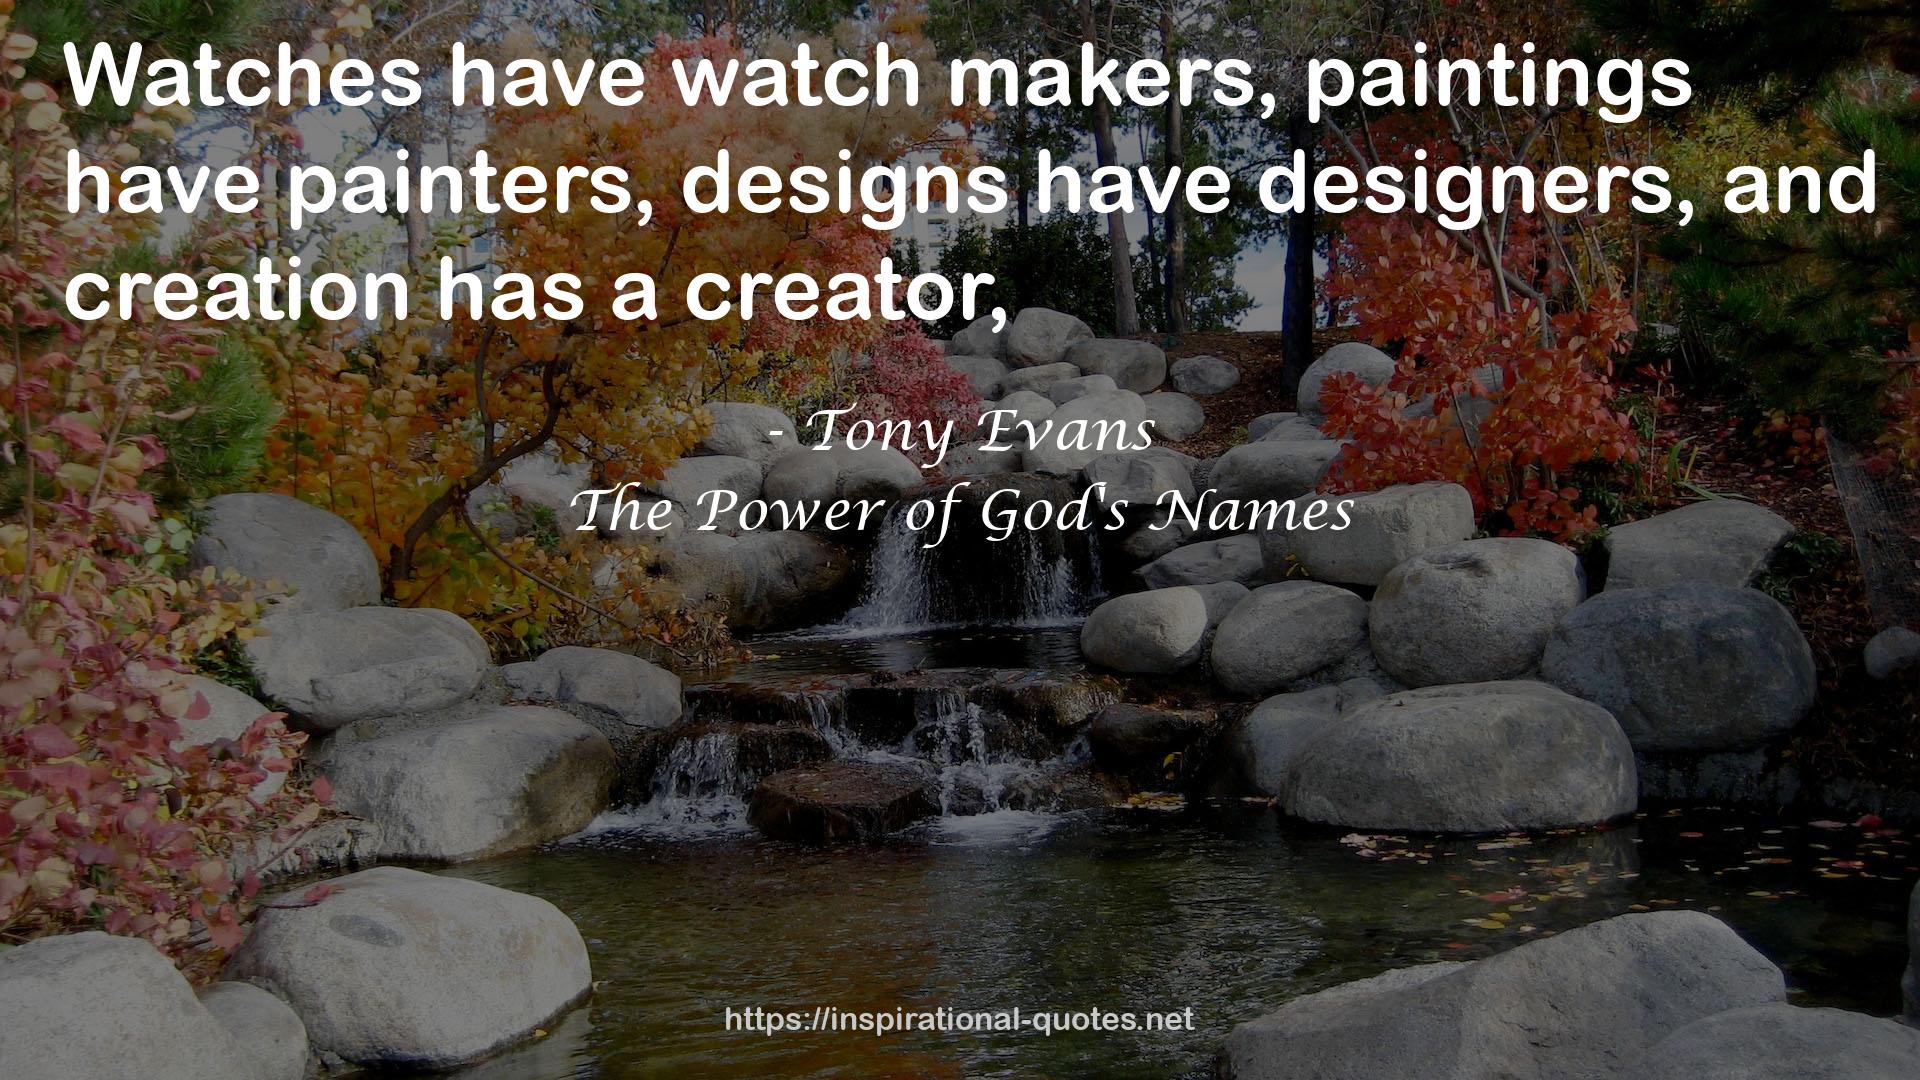 The Power of God's Names QUOTES